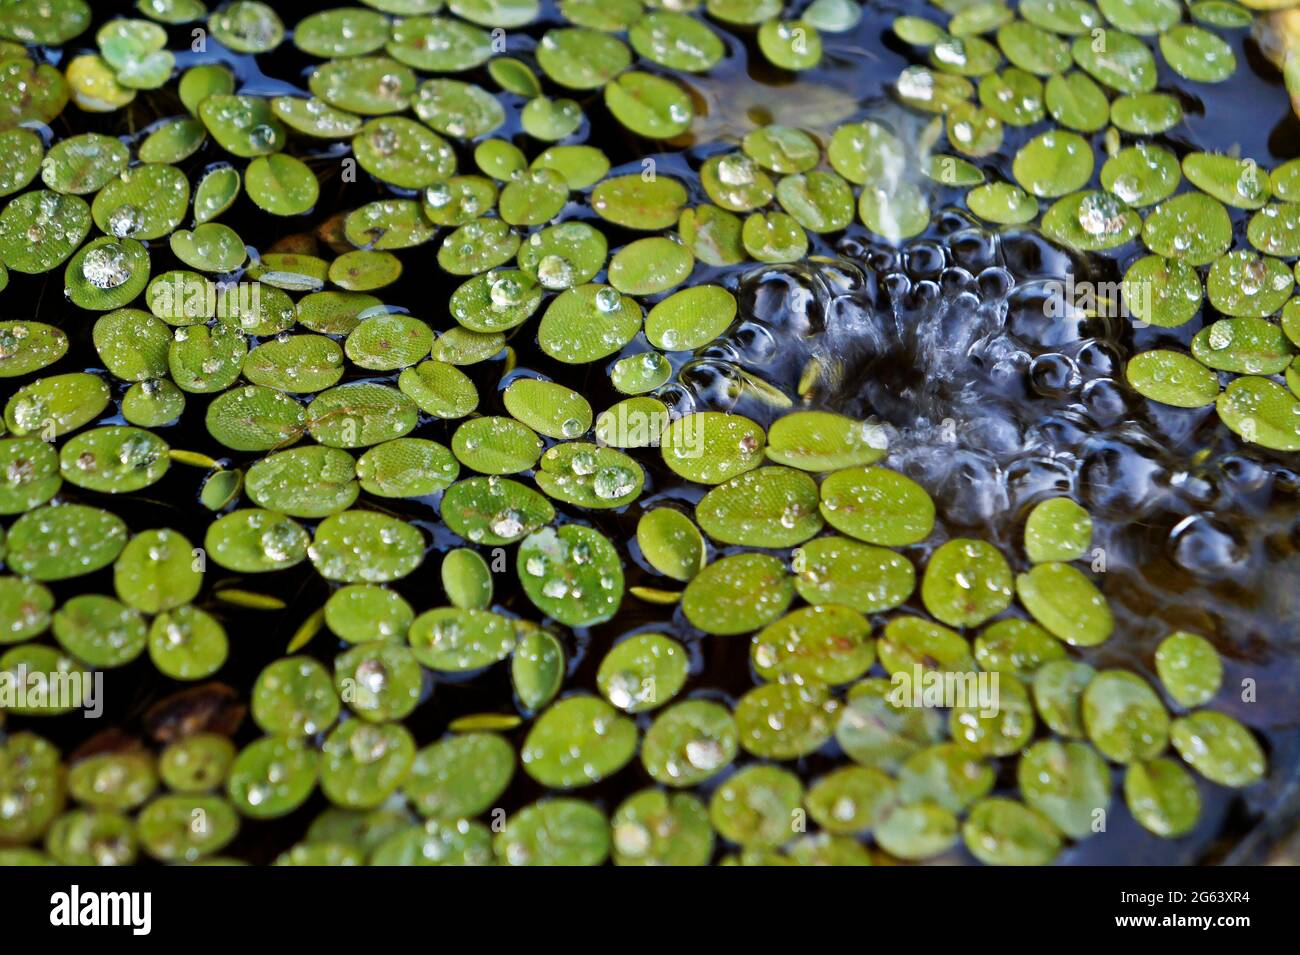 Water plants in the pond (Salvinia auriculata) Stock Photo